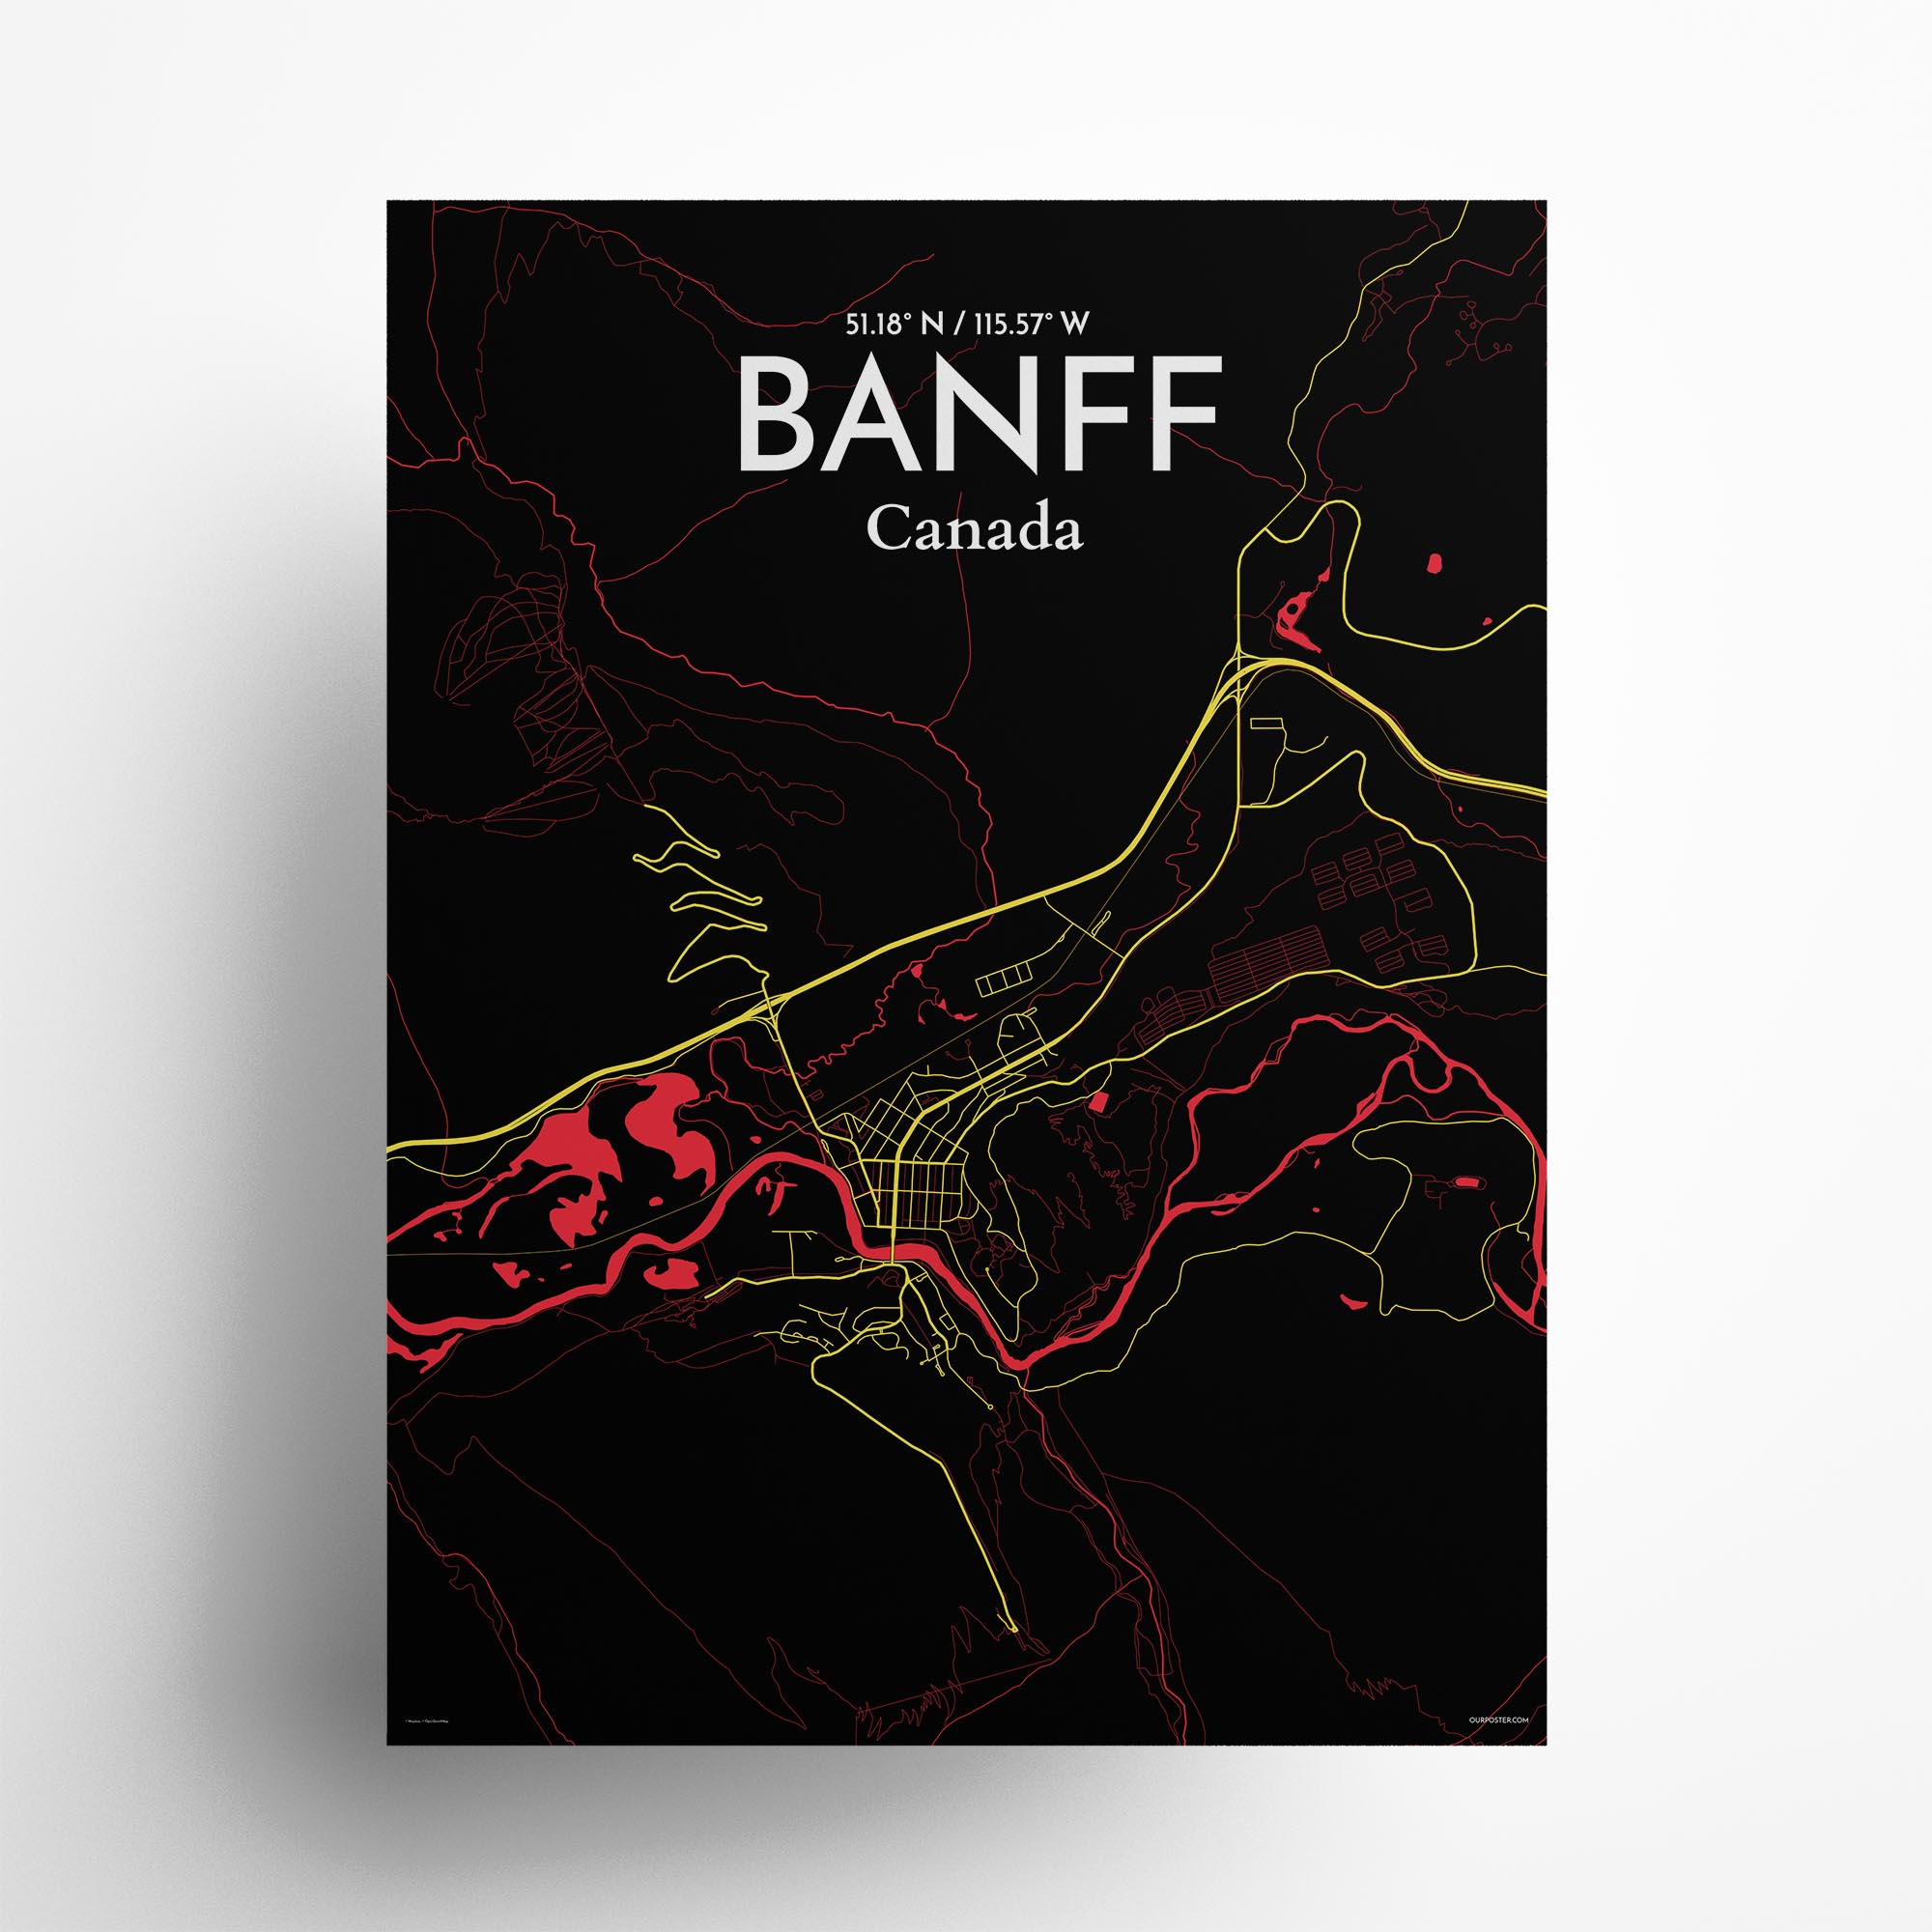 Banff city map poster in Contrast of size 18" x 24"